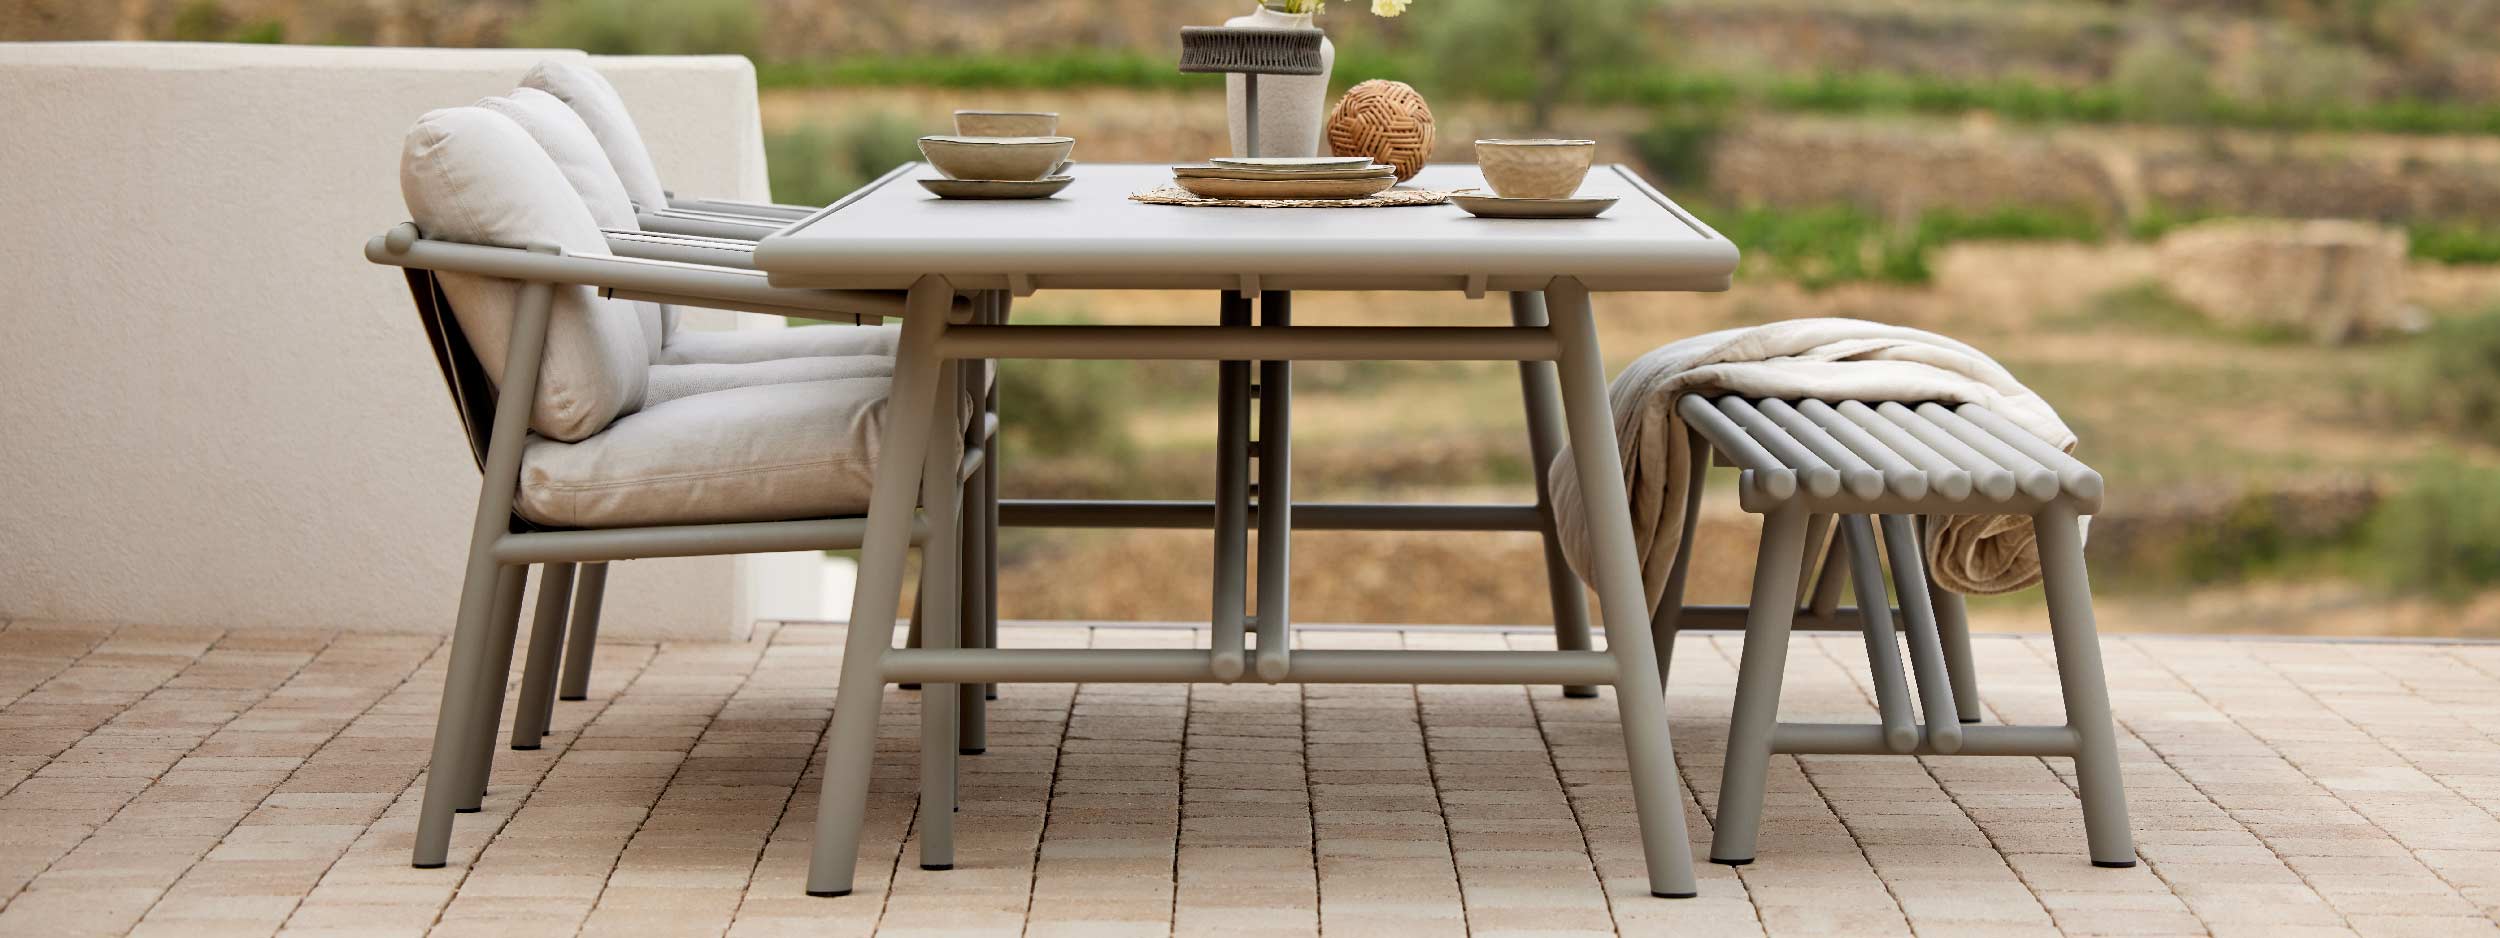 Image of Cane-line Sticks modern garden table and chairs on terrace with arid countryside in the background